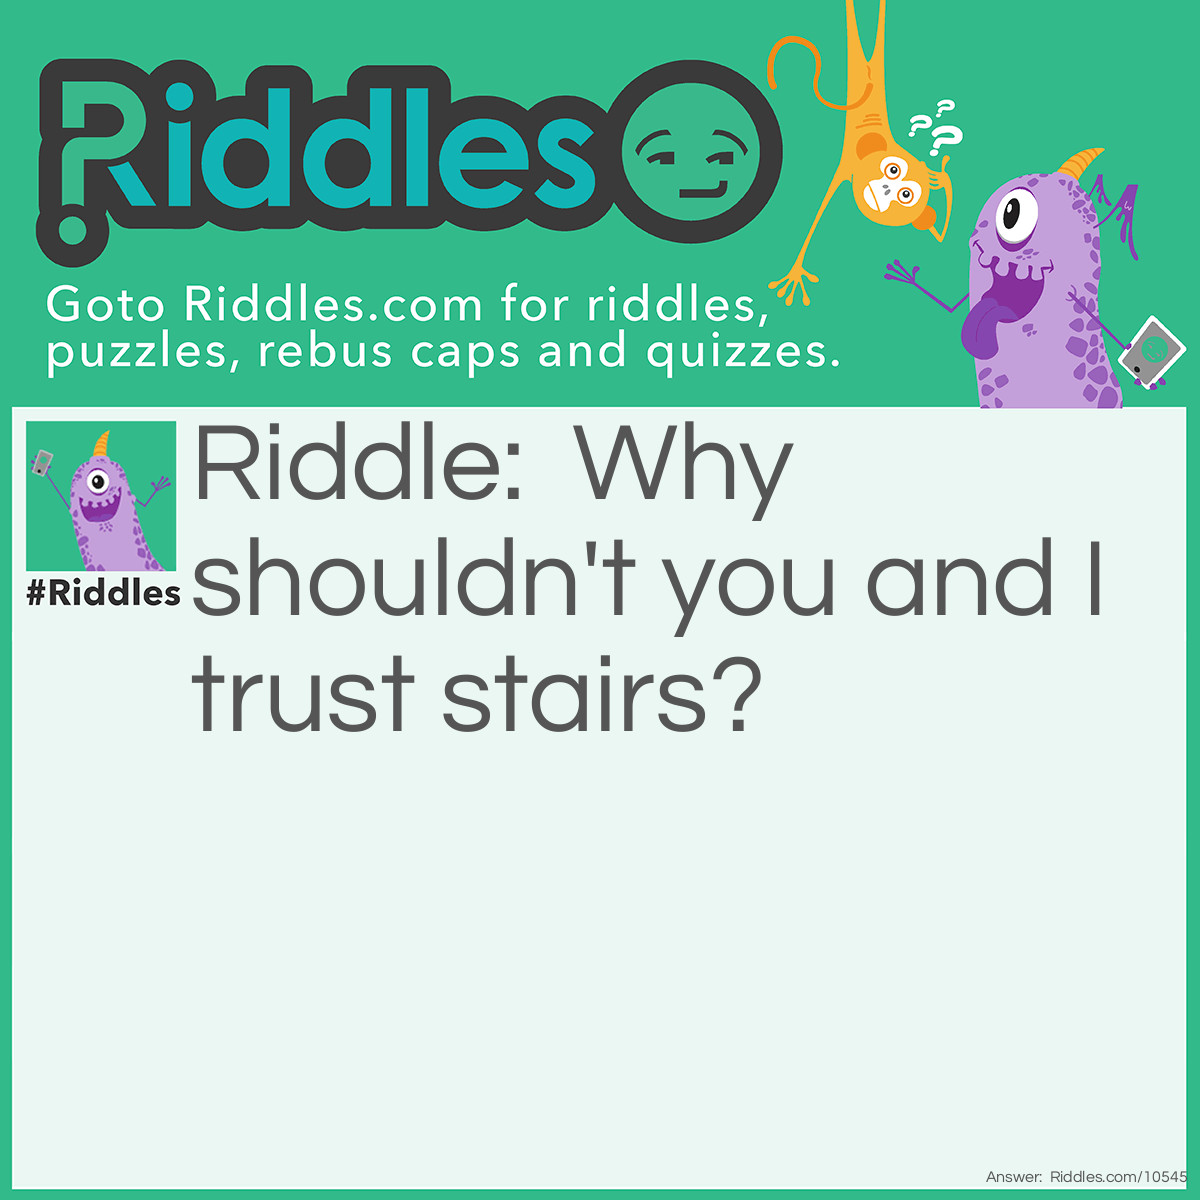 Riddle: Why shouldn't you and I trust stairs? Answer: Because they are probably up to something.